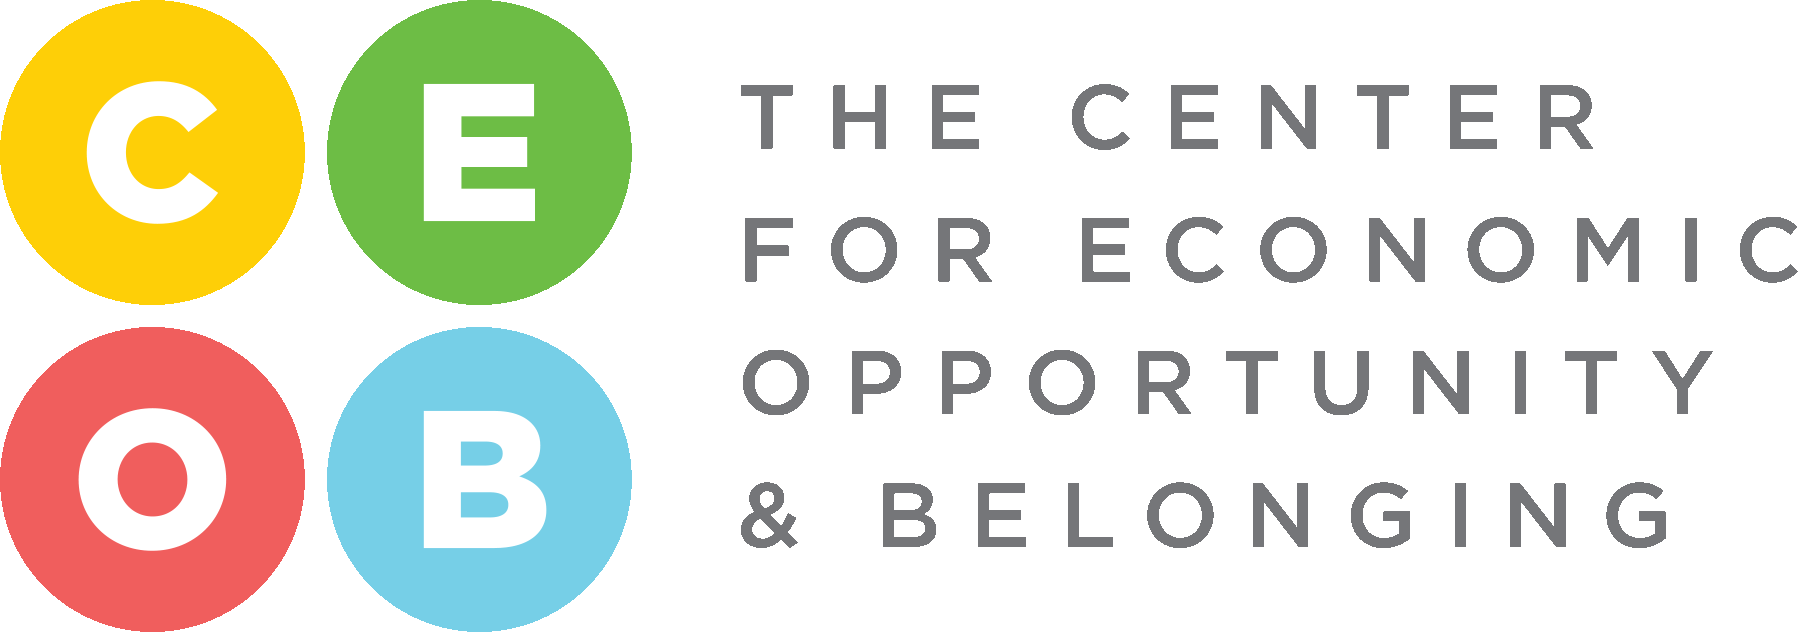 Center for Economic Opportunity and Belonging